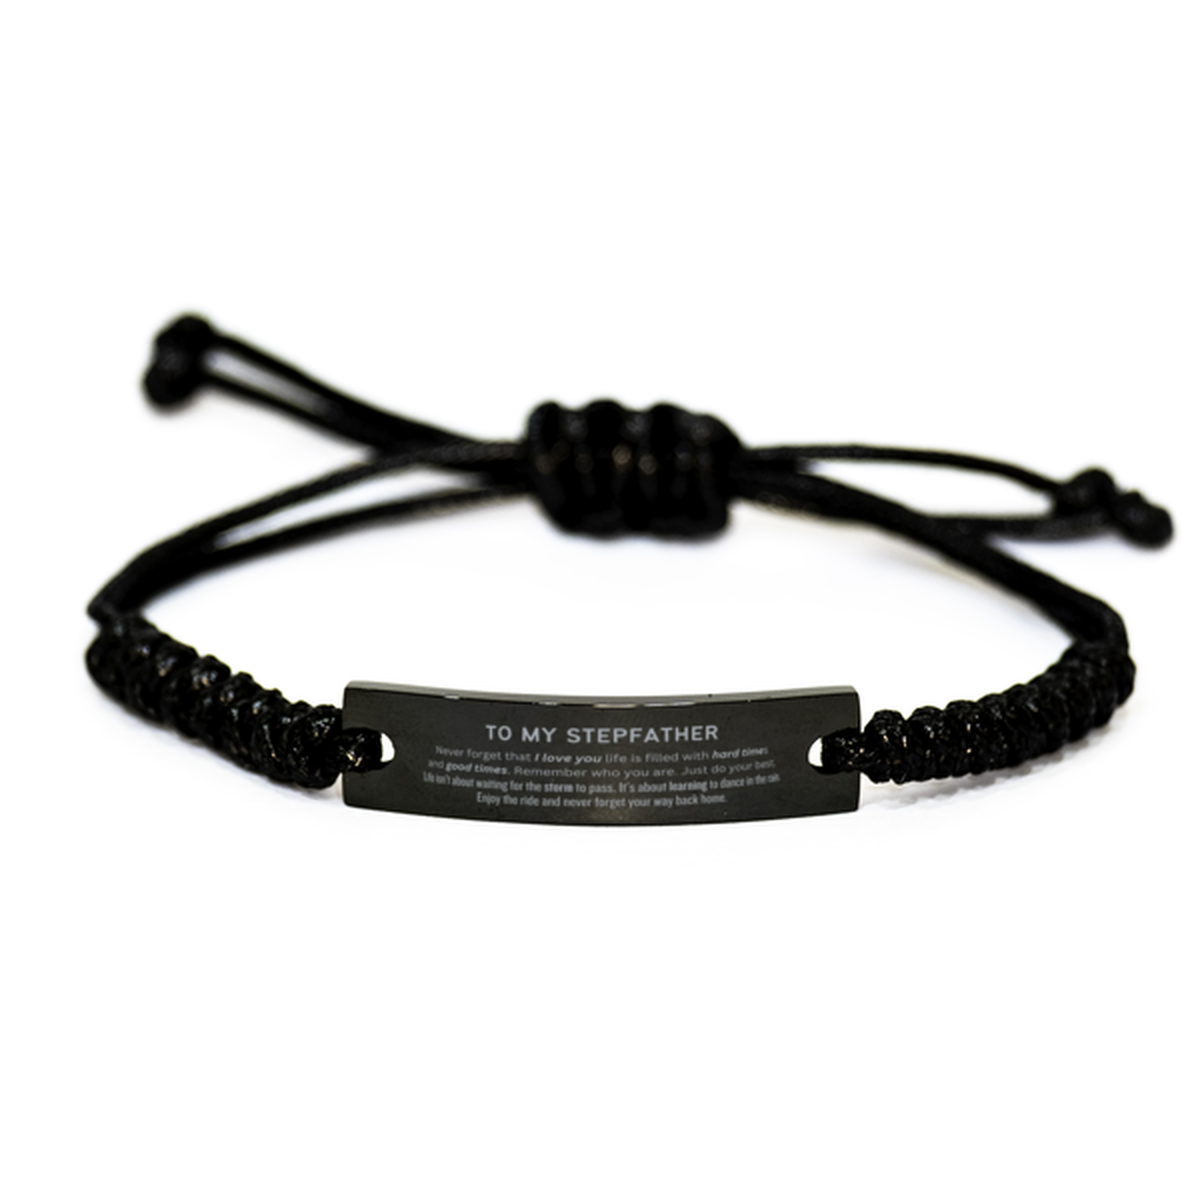 Christmas Stepfather Black Rope Bracelet Gifts, To My Stepfather Birthday Thank You Gifts For Stepfather, Graduation Unique Gifts For Stepfather To My Stepfather Never forget that I love you life is filled with hard times and good times. Remember who you